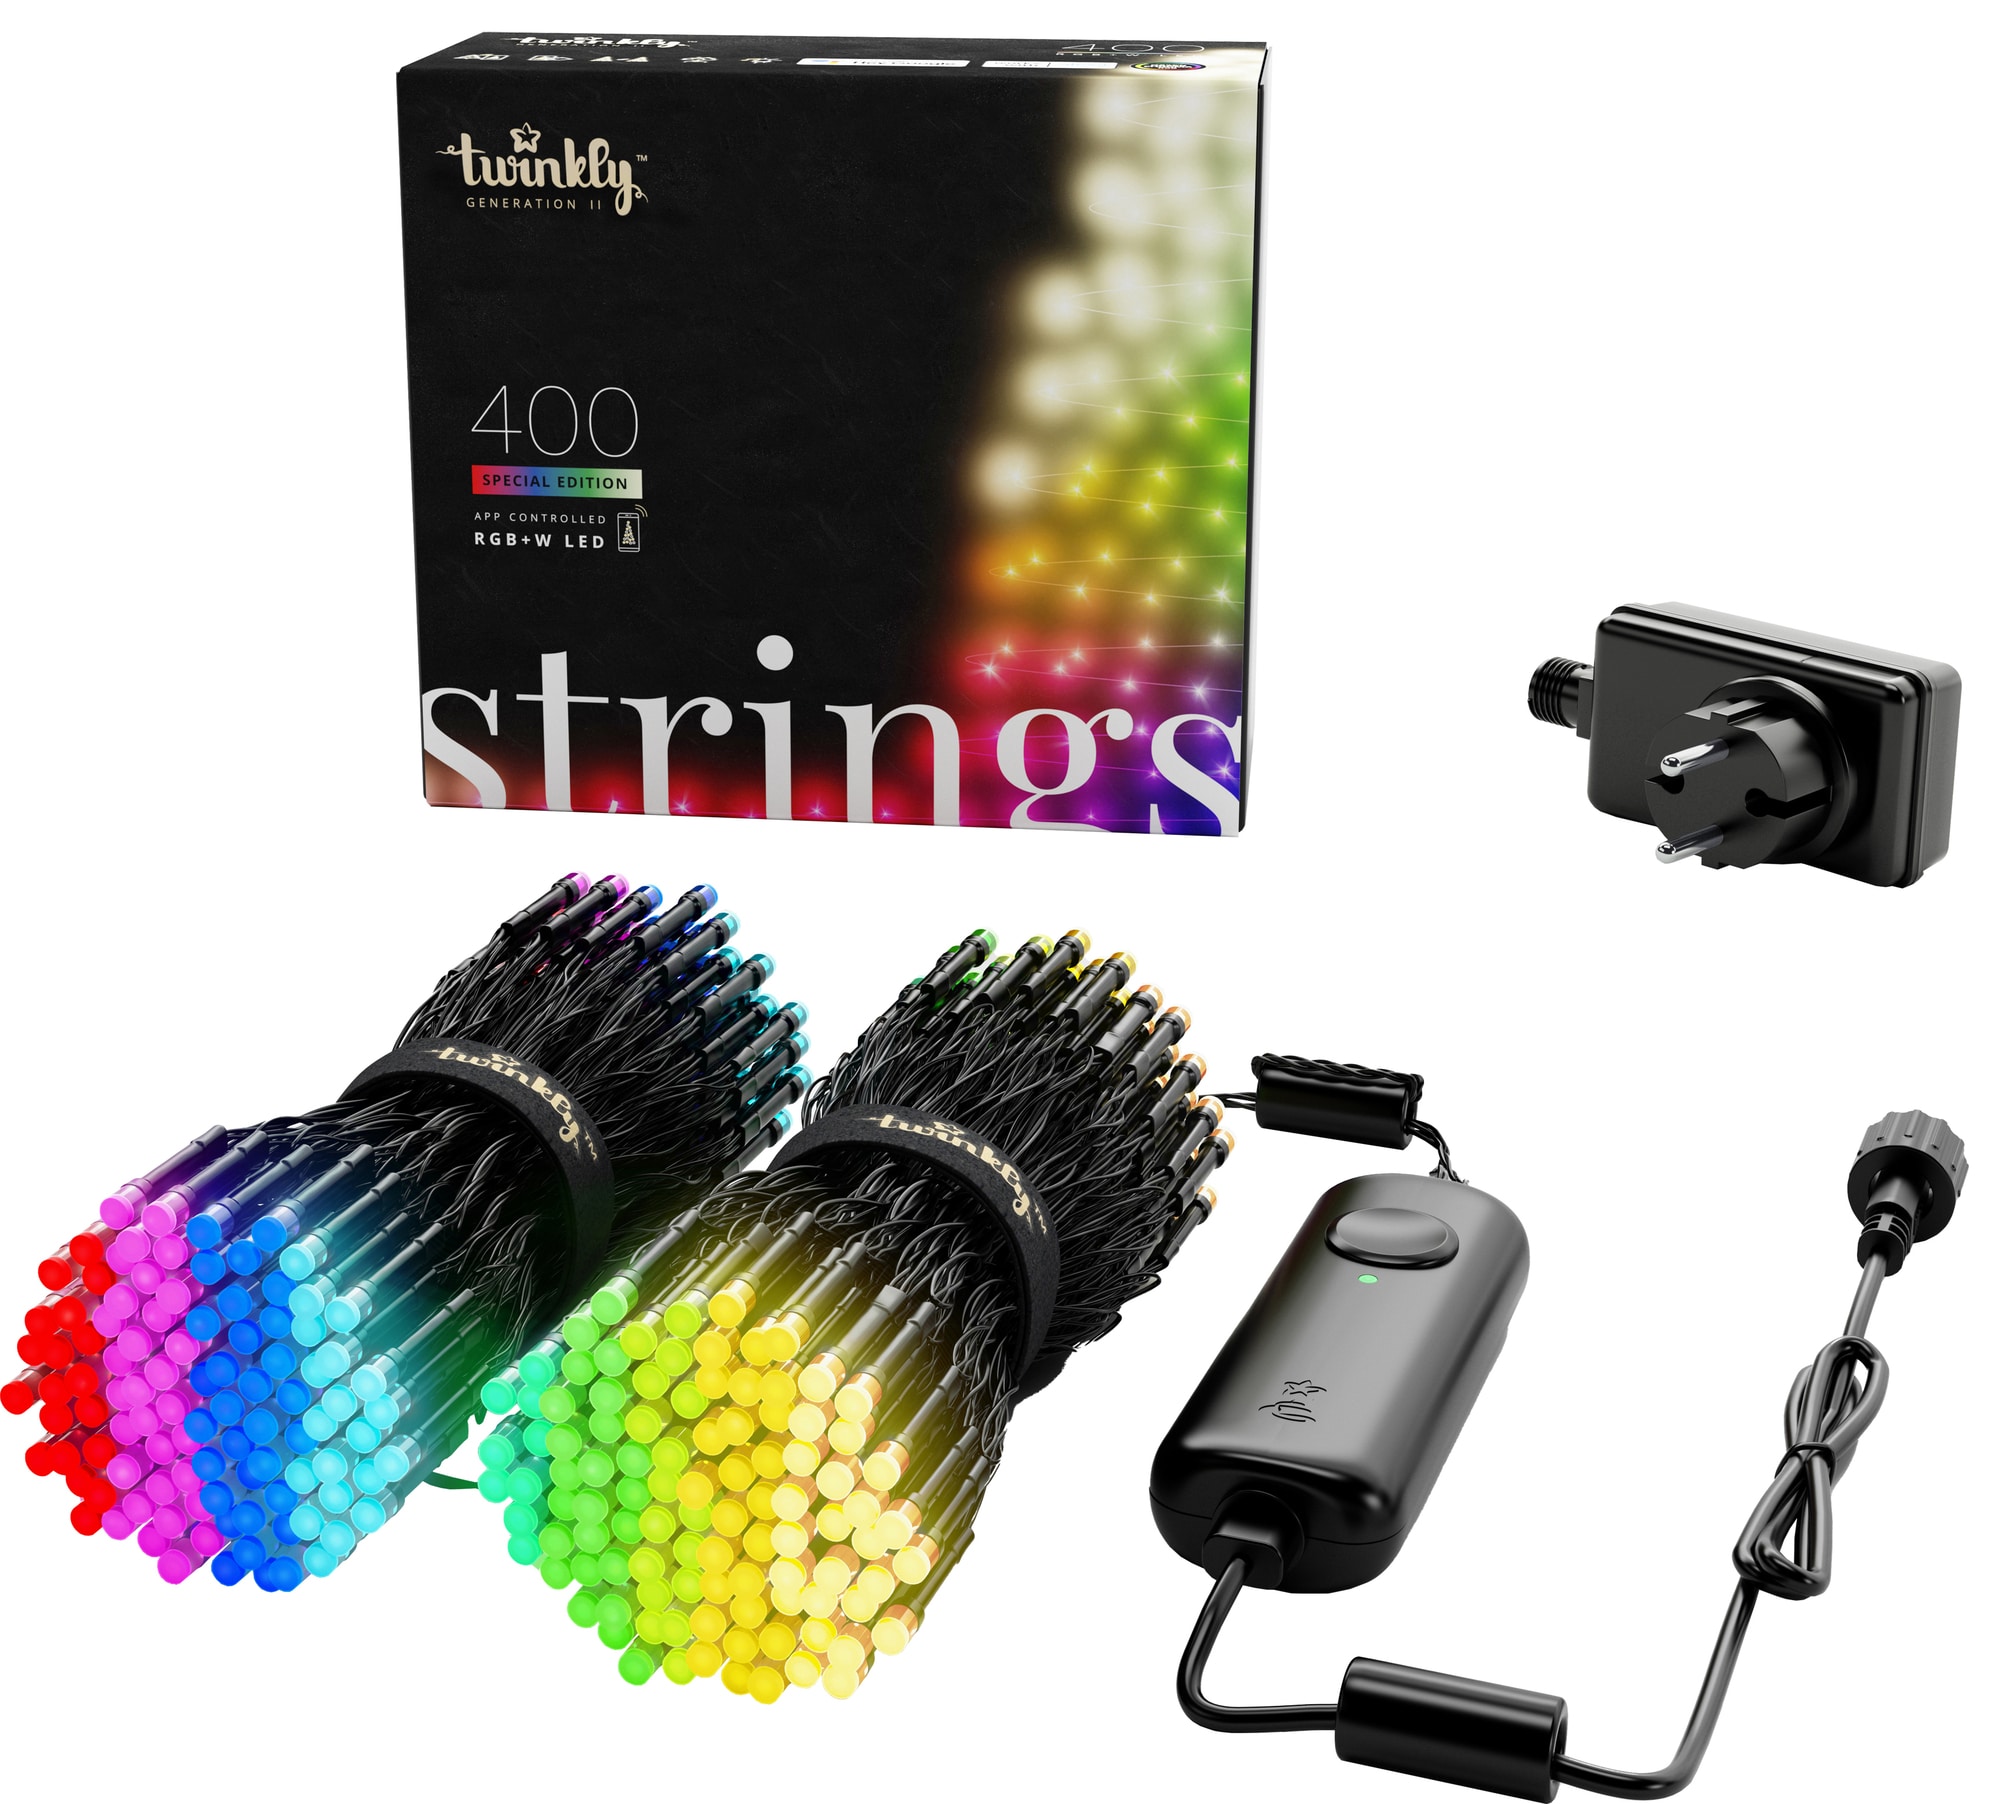 11: Twinkly Strings Special Edition - 400 RGB+W LED Lights String 32 m 16 Million Colors + Warm White - Generation II